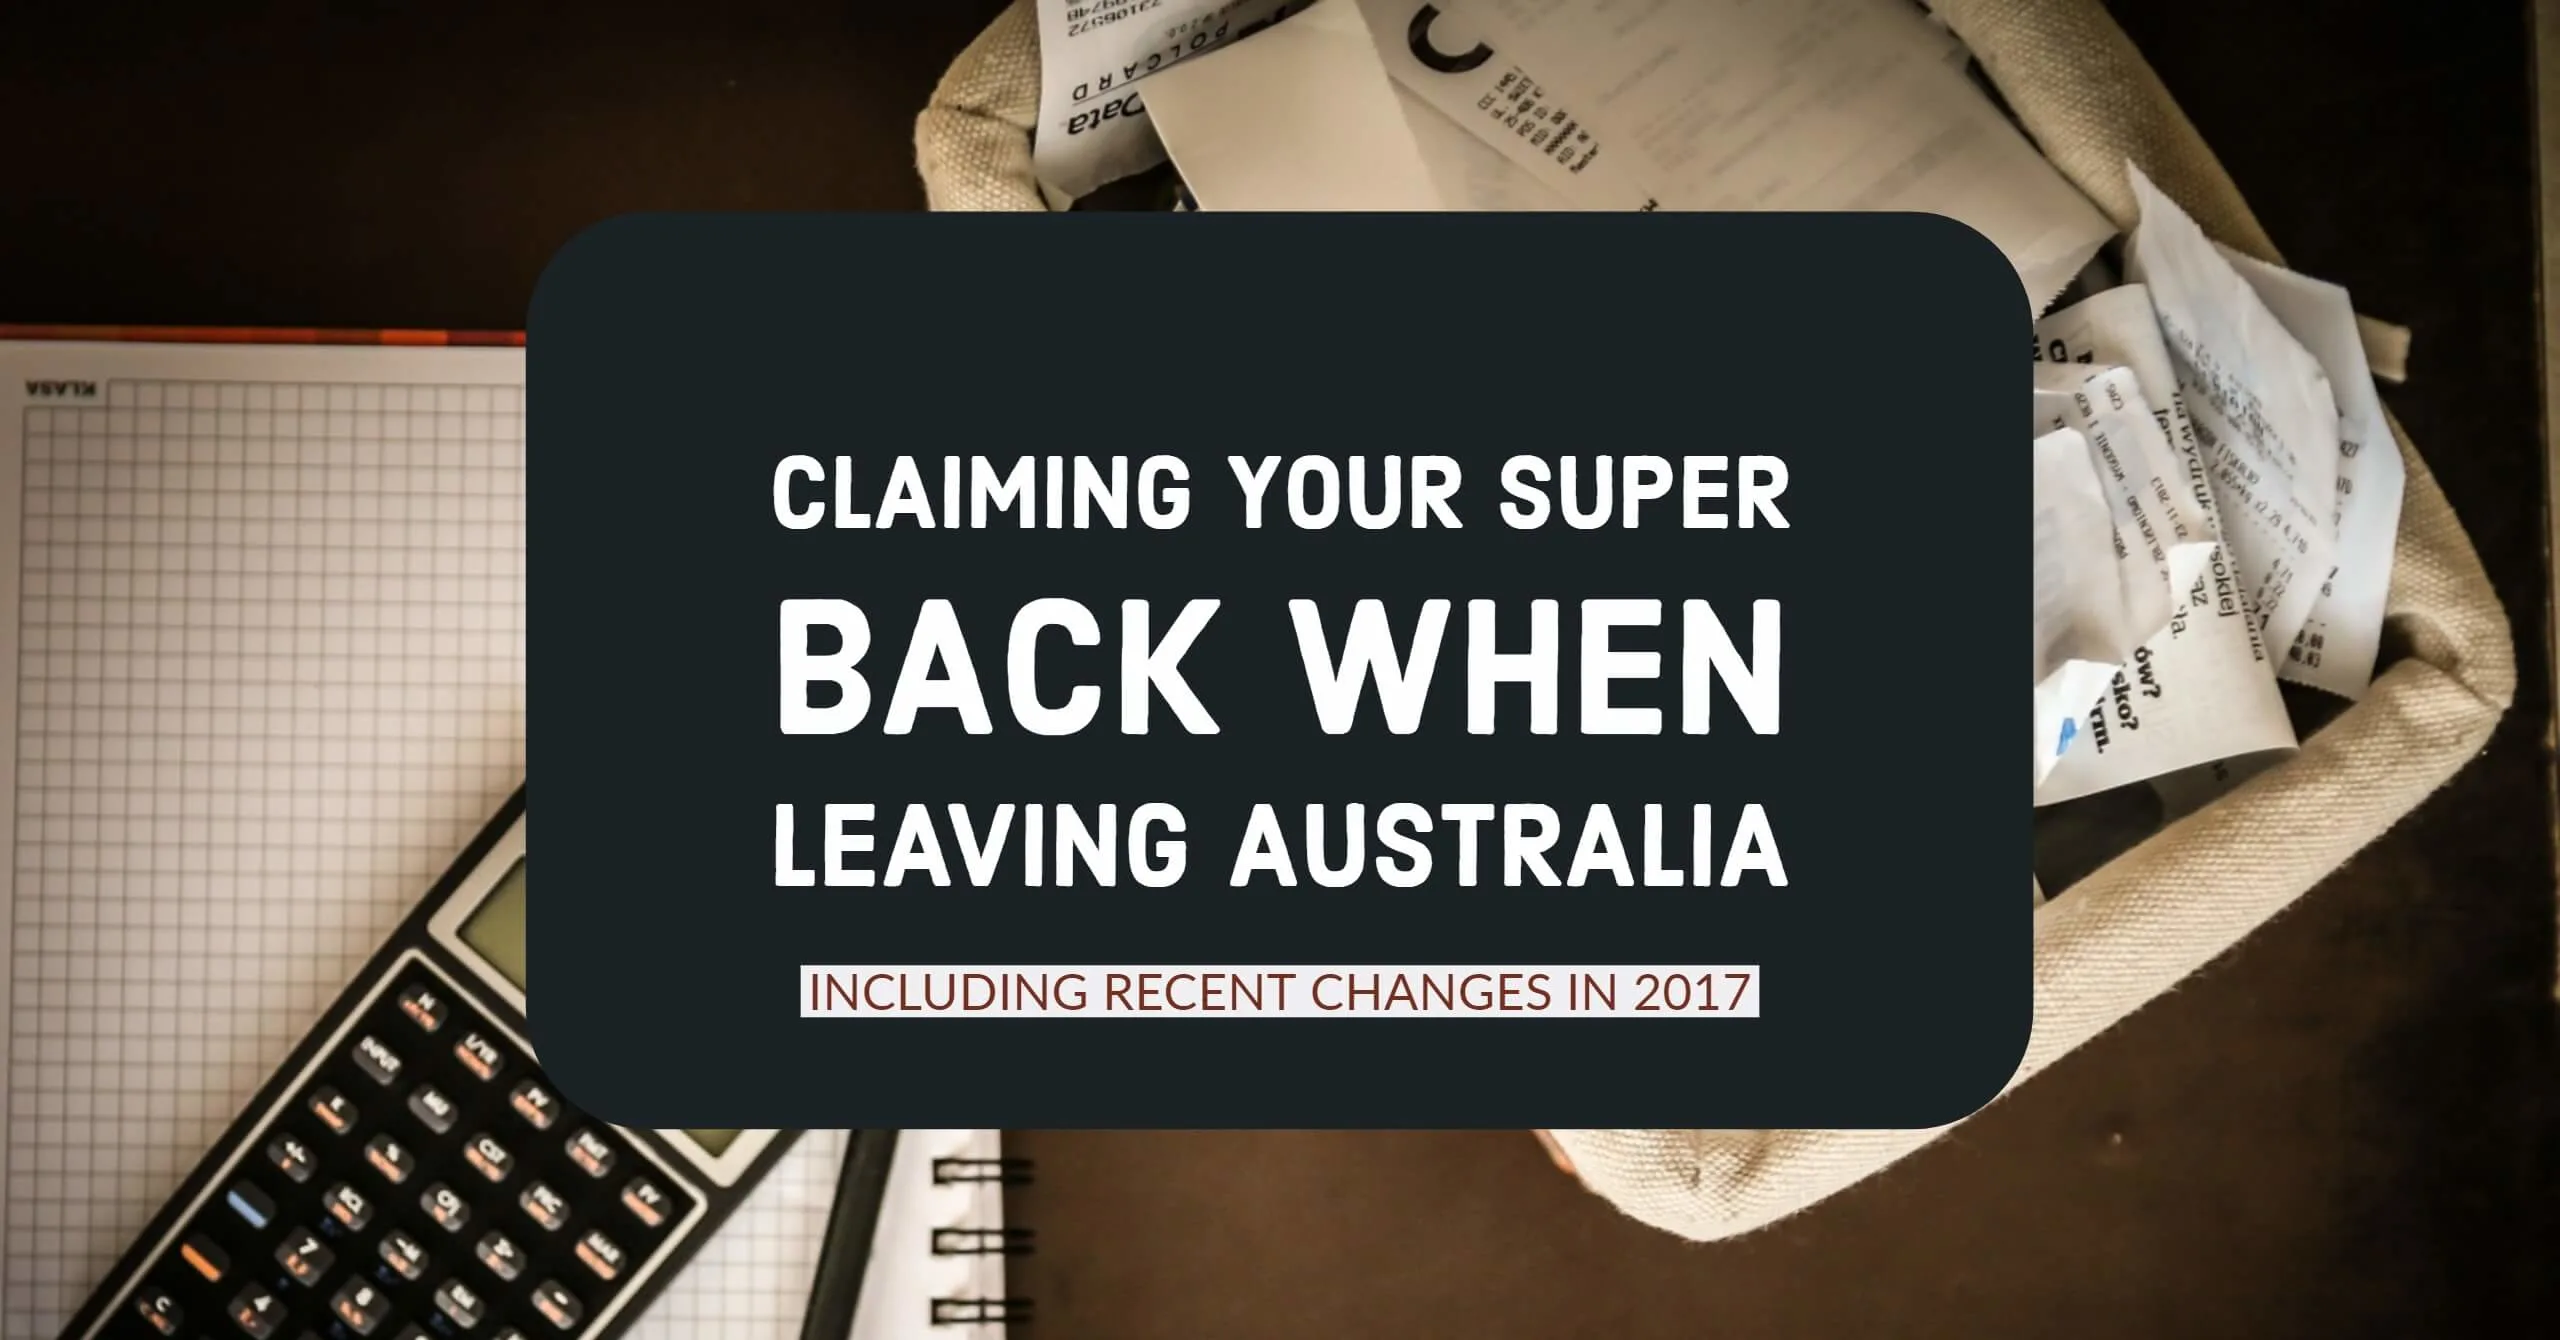 Claiming Your Superannuation Back When Leaving Australia including changes that happened in 2017